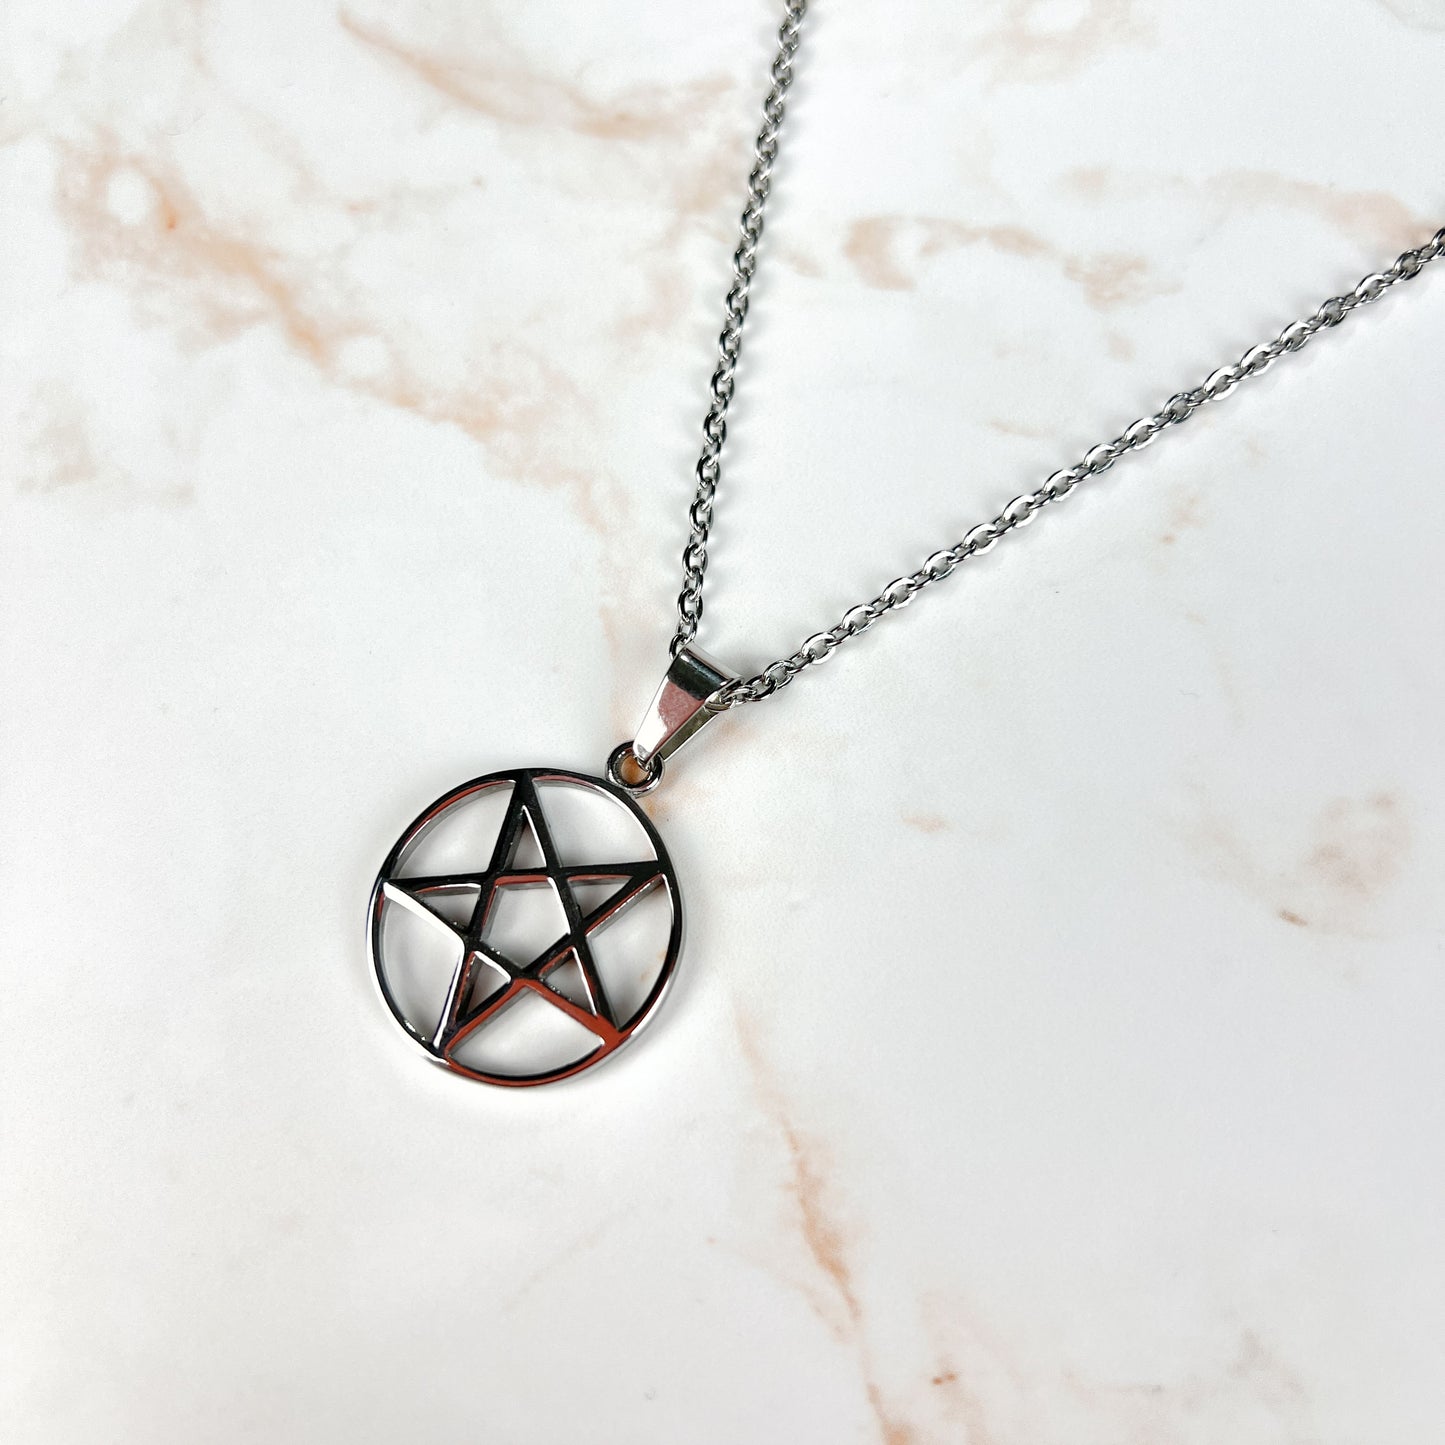 Stainless steel reversed pentacle necklace Baguette Magick